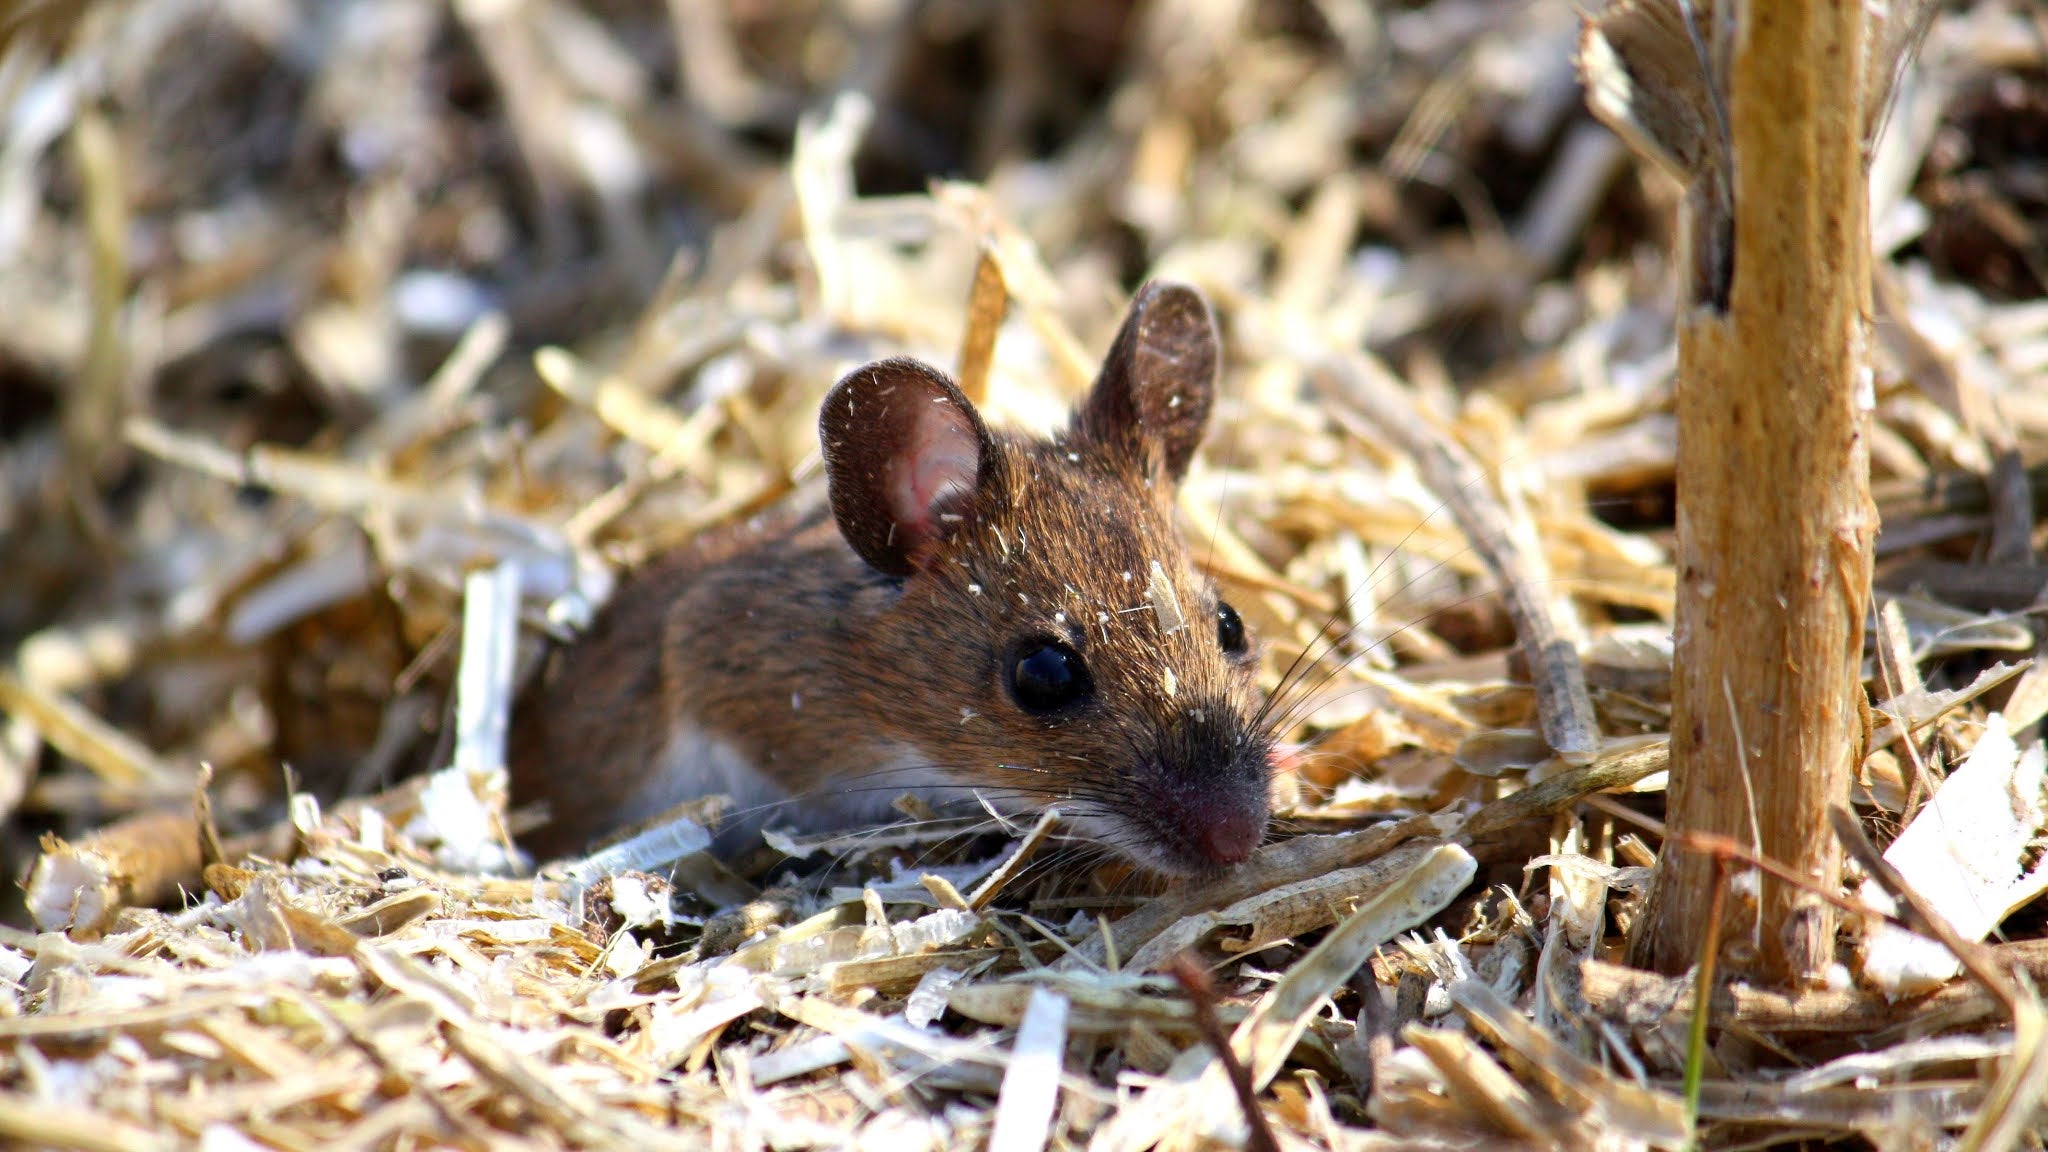 A photo of a mouse appearing out of wood chippings